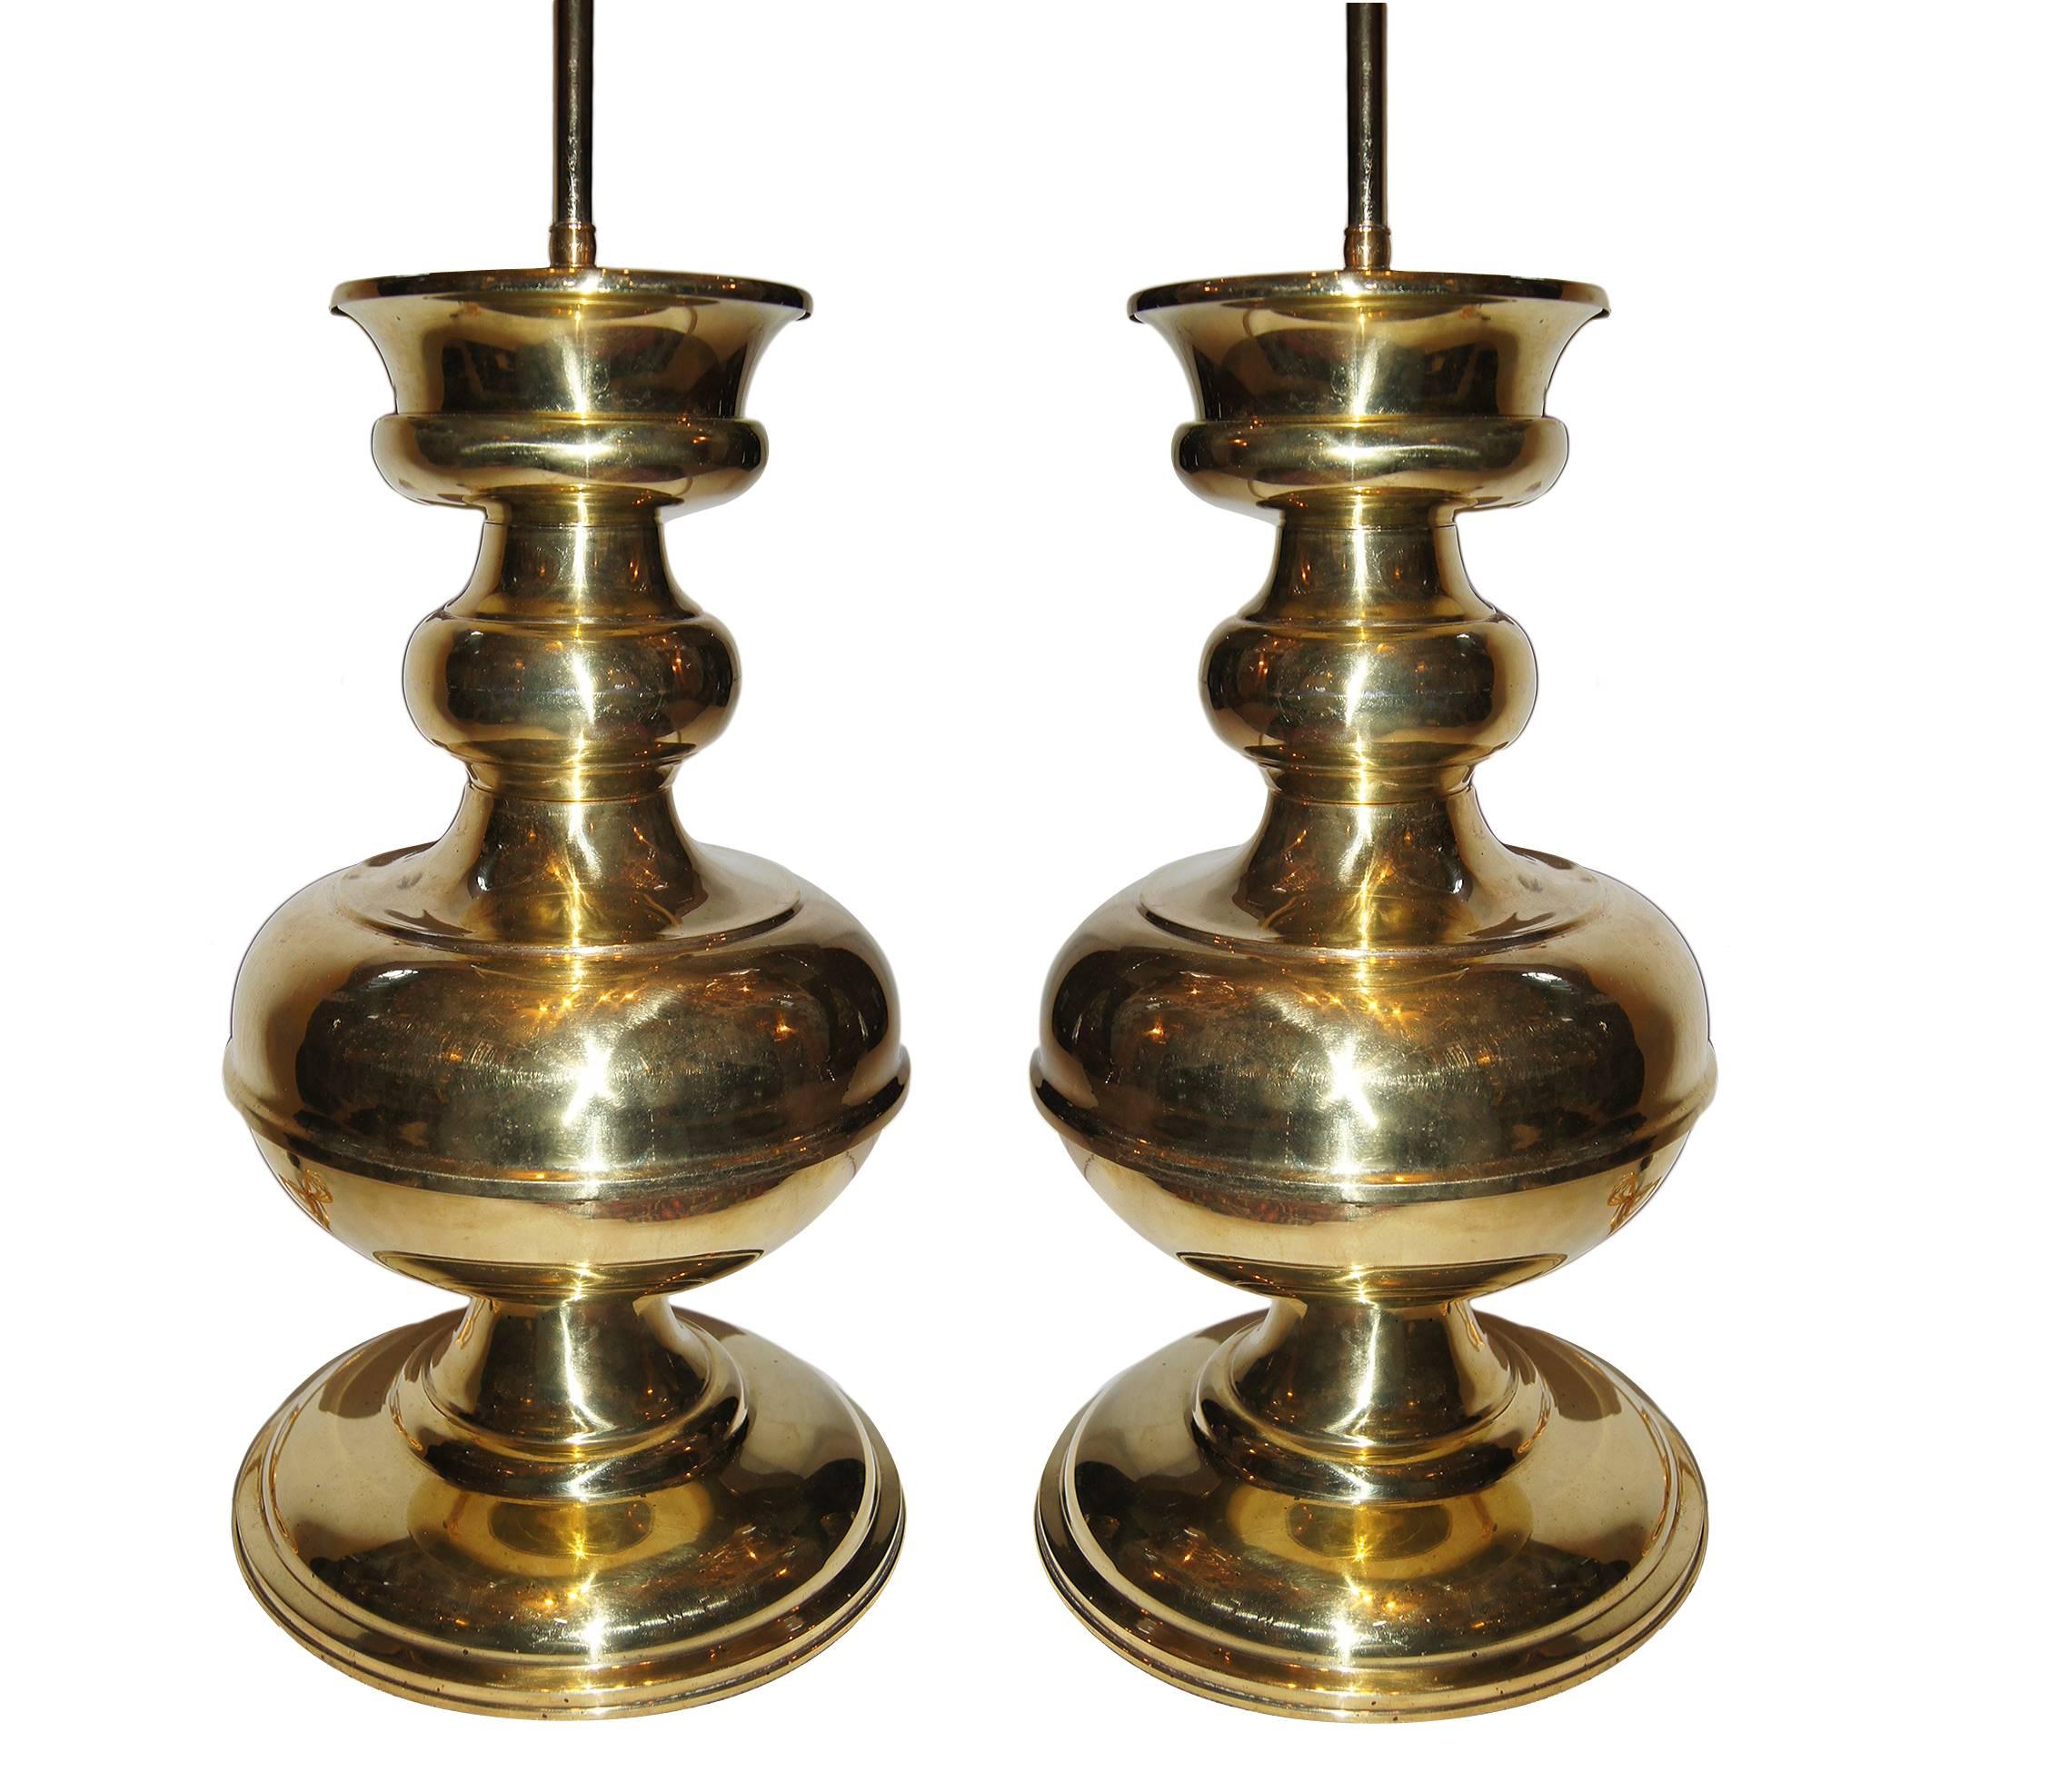 Pair of 1940s French polished brass table lamps, moderne version of a neoclassic baluster lamp. Polished finish, original patina. 

Measurements:
Height of body 19